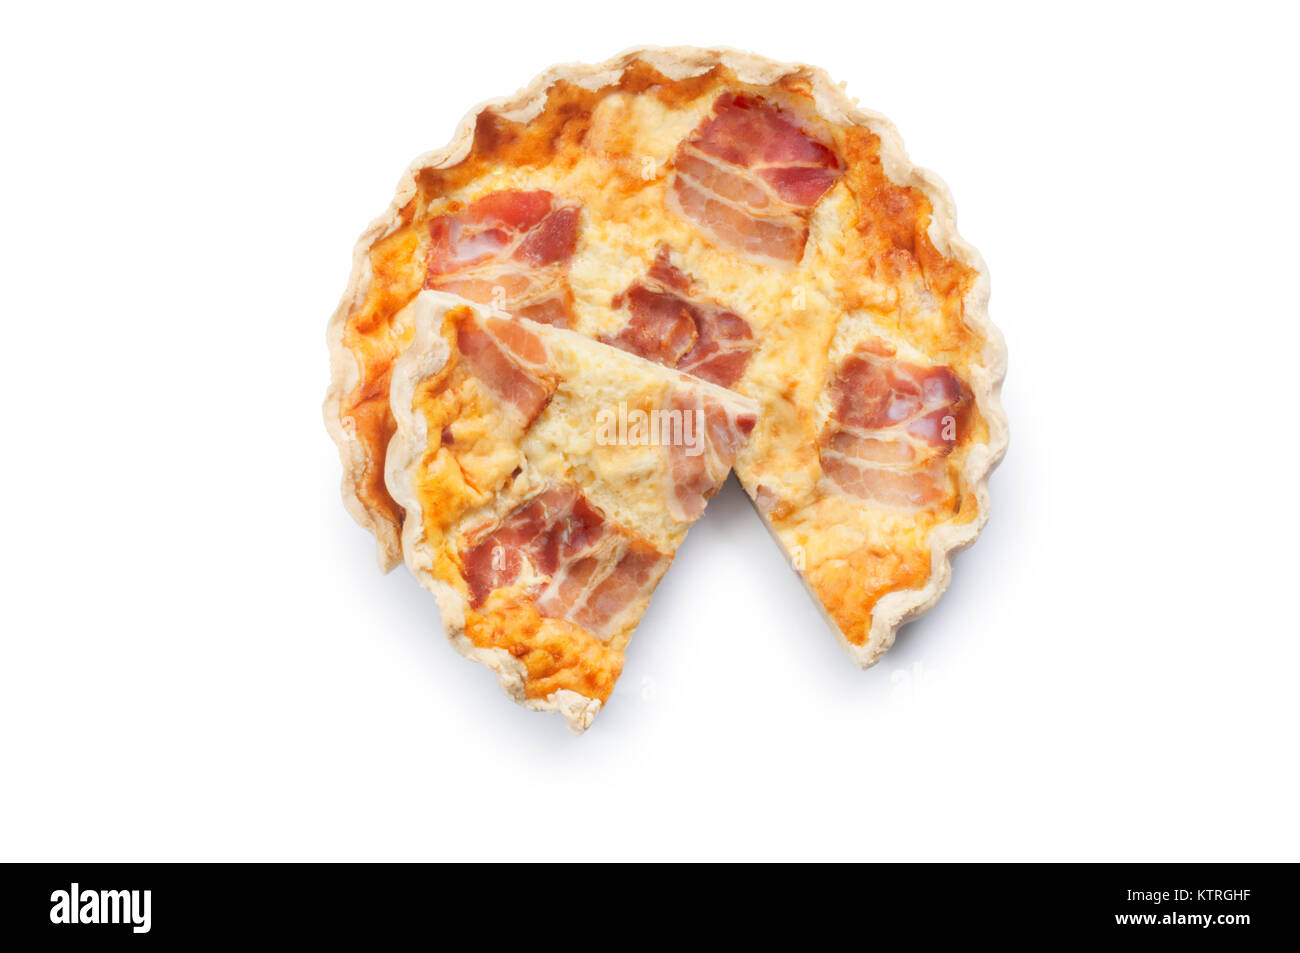 Studio shot of a single quiche isolated against a white background - John Gollop Stock Photo